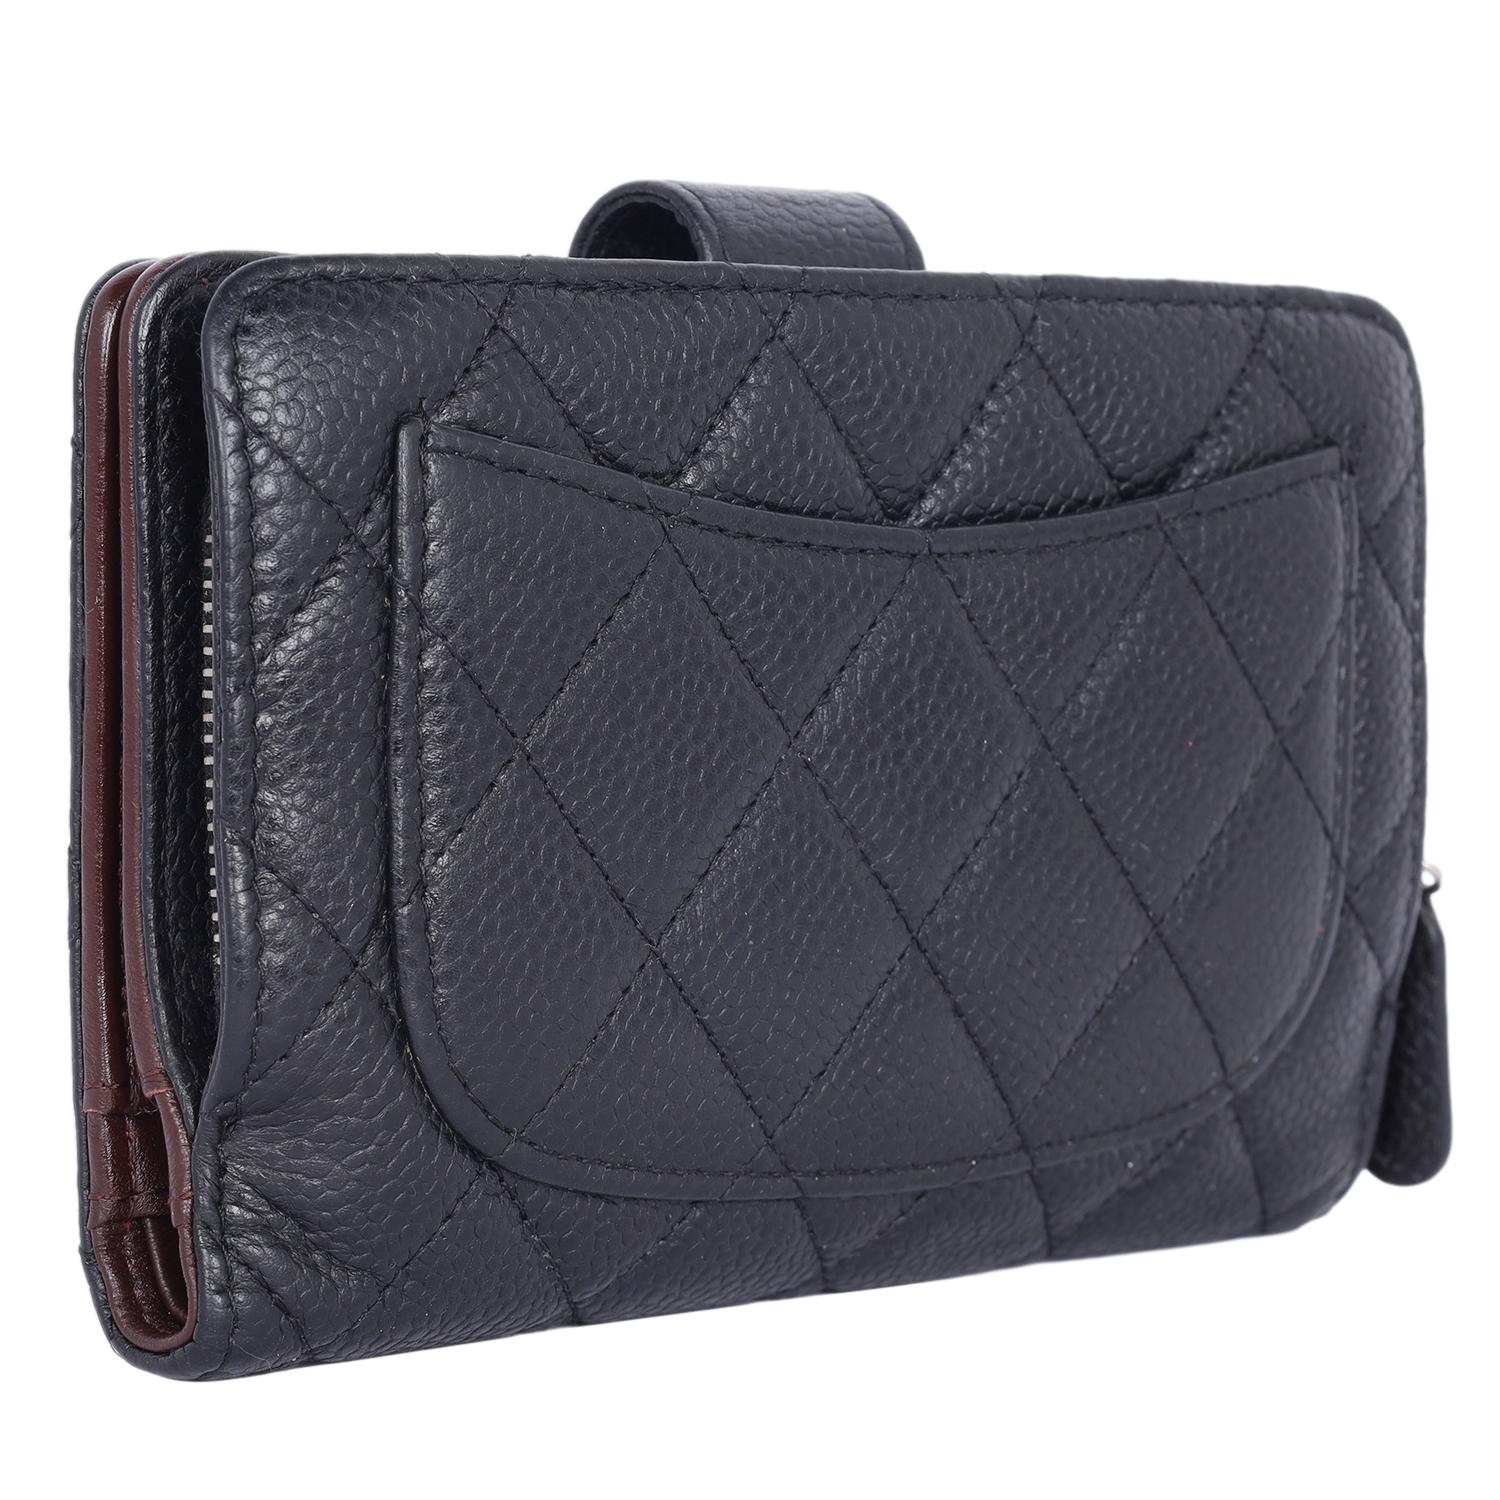 Chanel Classic Black Caviar Quilted Zipped French Wallet 3